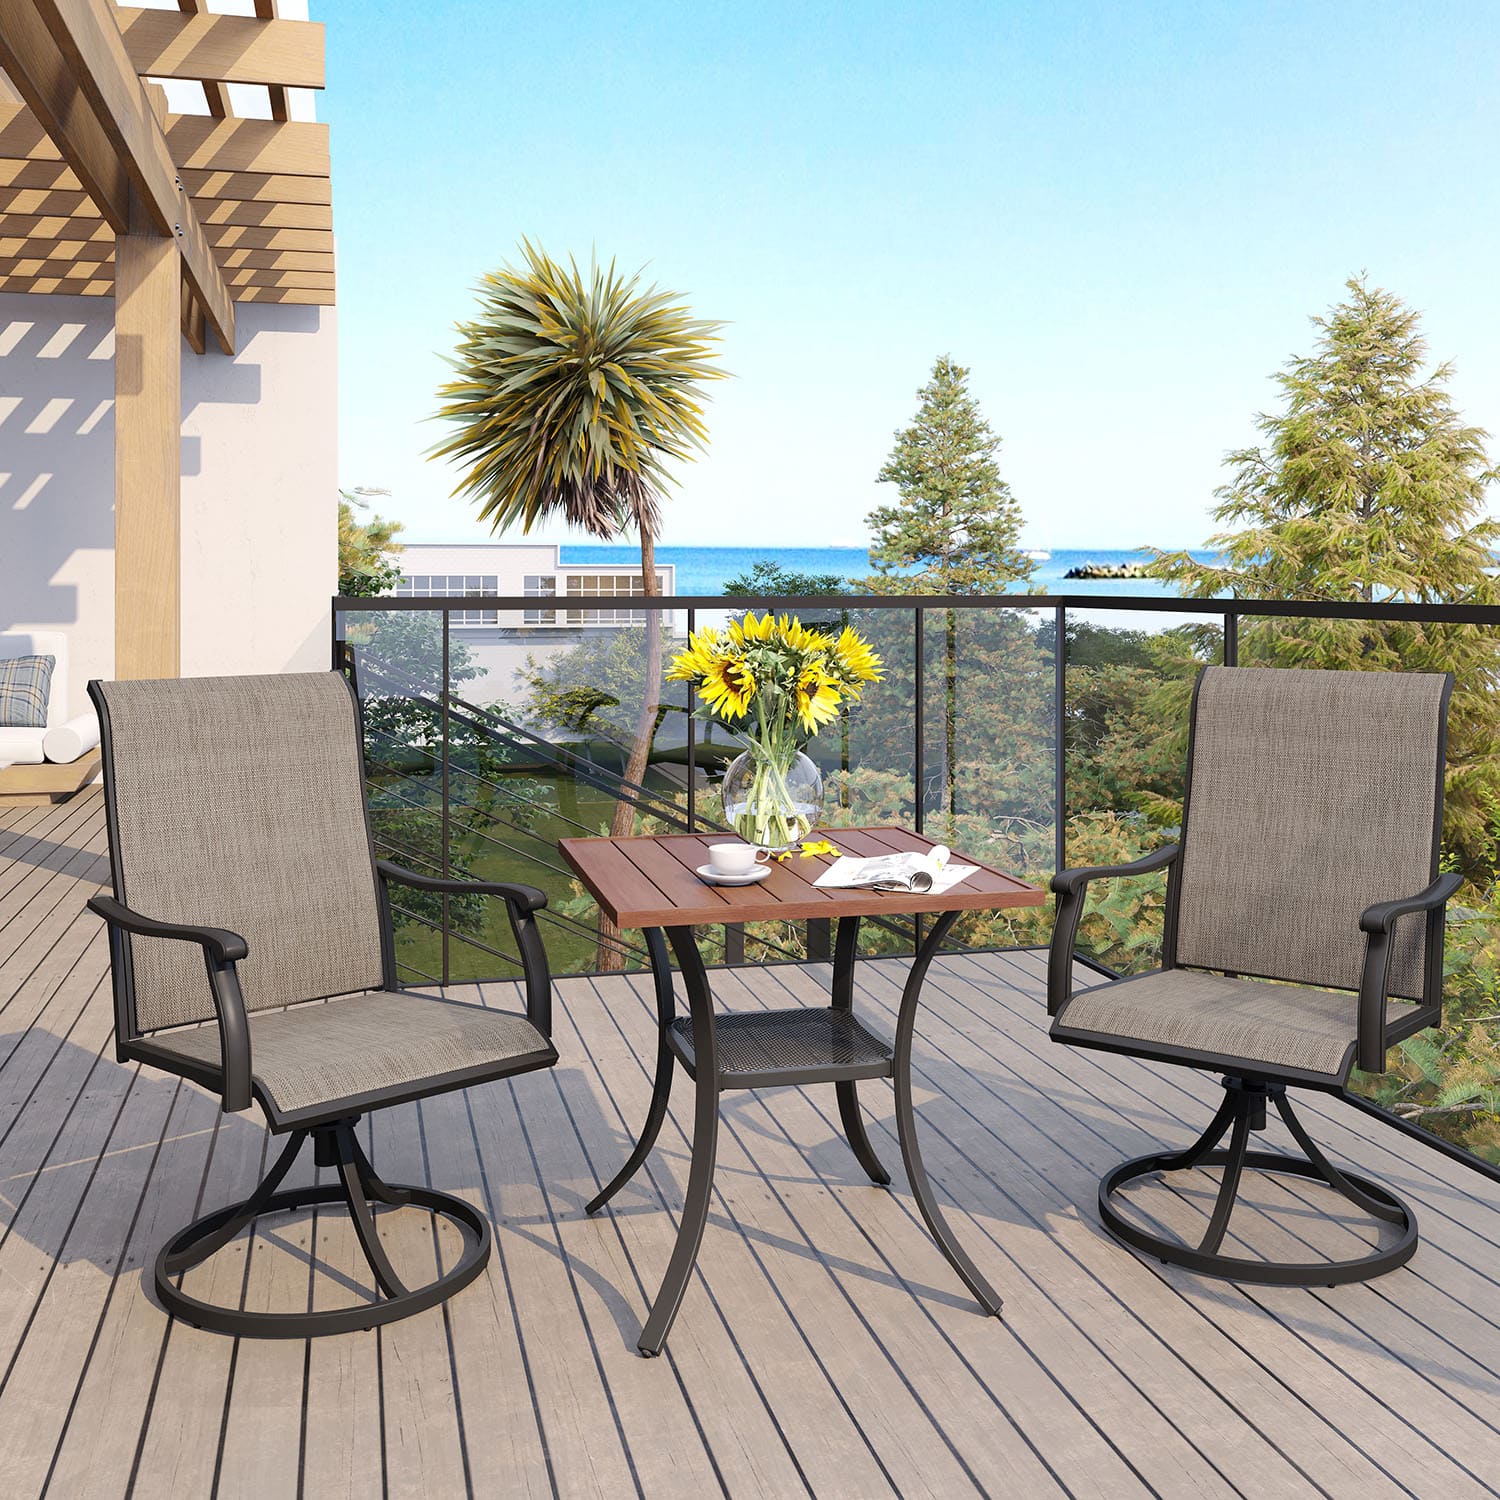 Vicllax 3-Piece Patio Bistro Set, Outdoor Swivel Chairs and Square Bisto Table